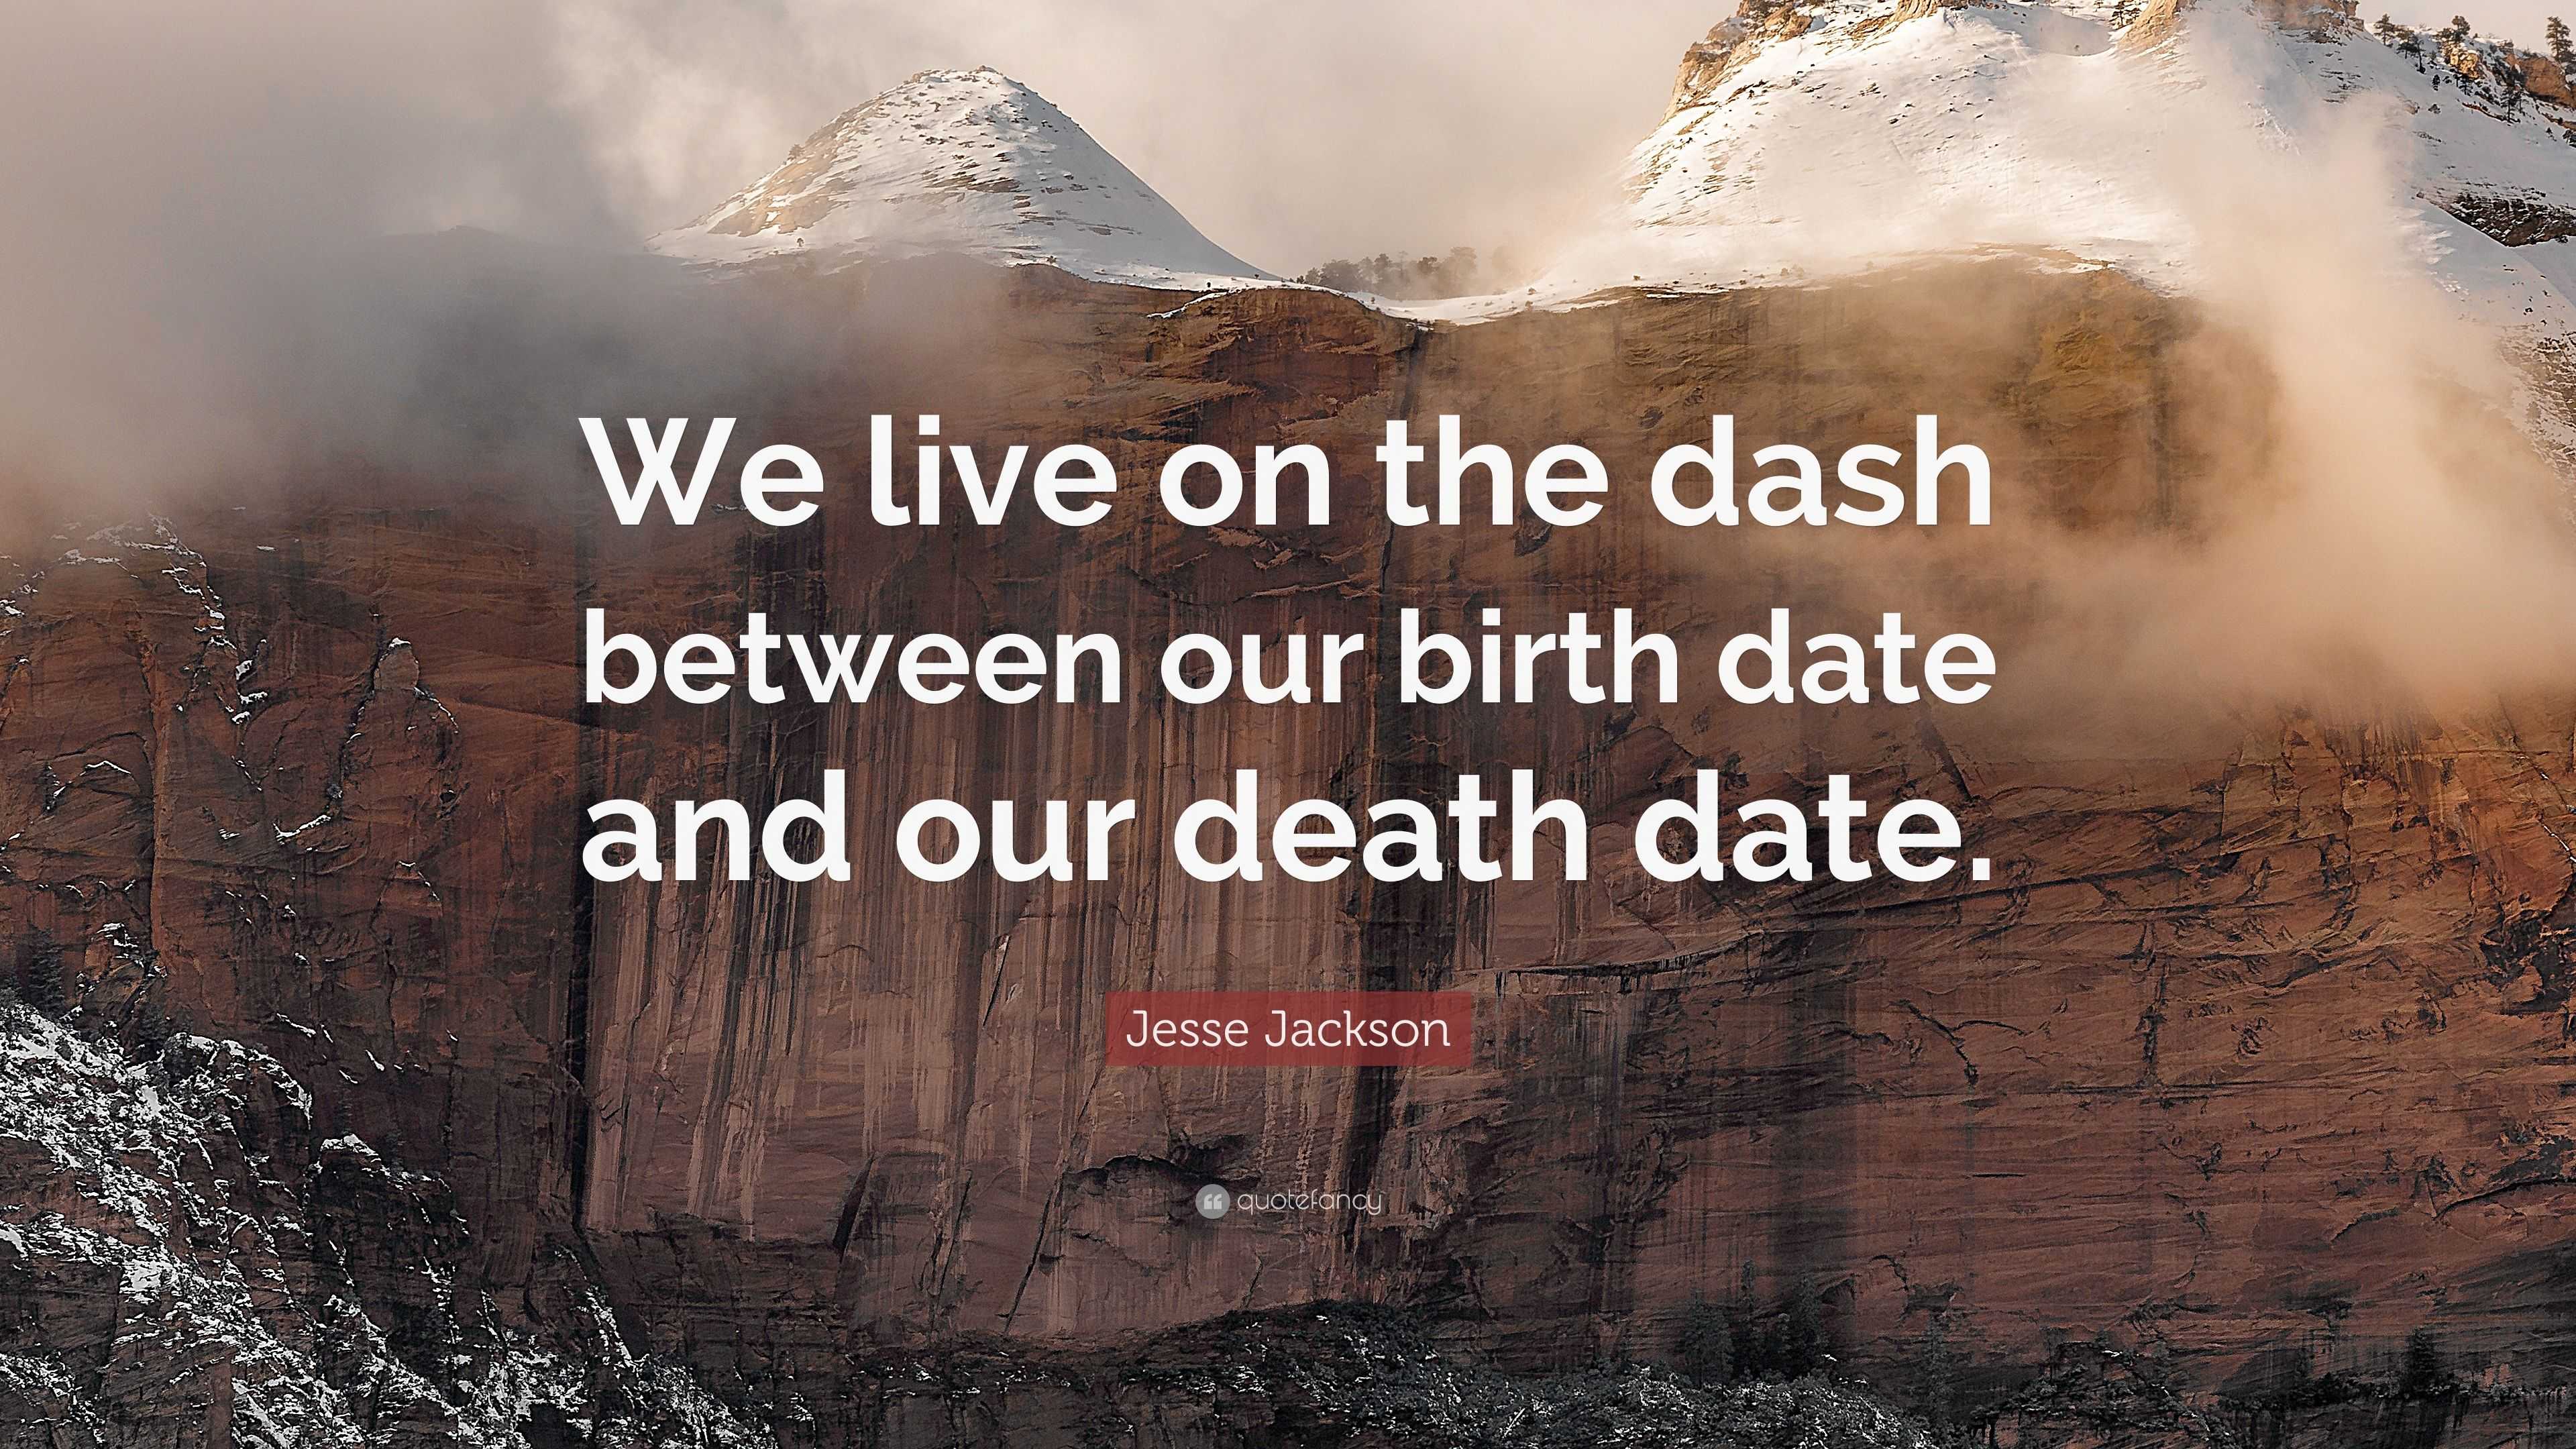 https://quotefancy.com/media/wallpaper/3840x2160/2730600-Jesse-Jackson-Quote-We-live-on-the-dash-between-our-birth-date-and.jpg